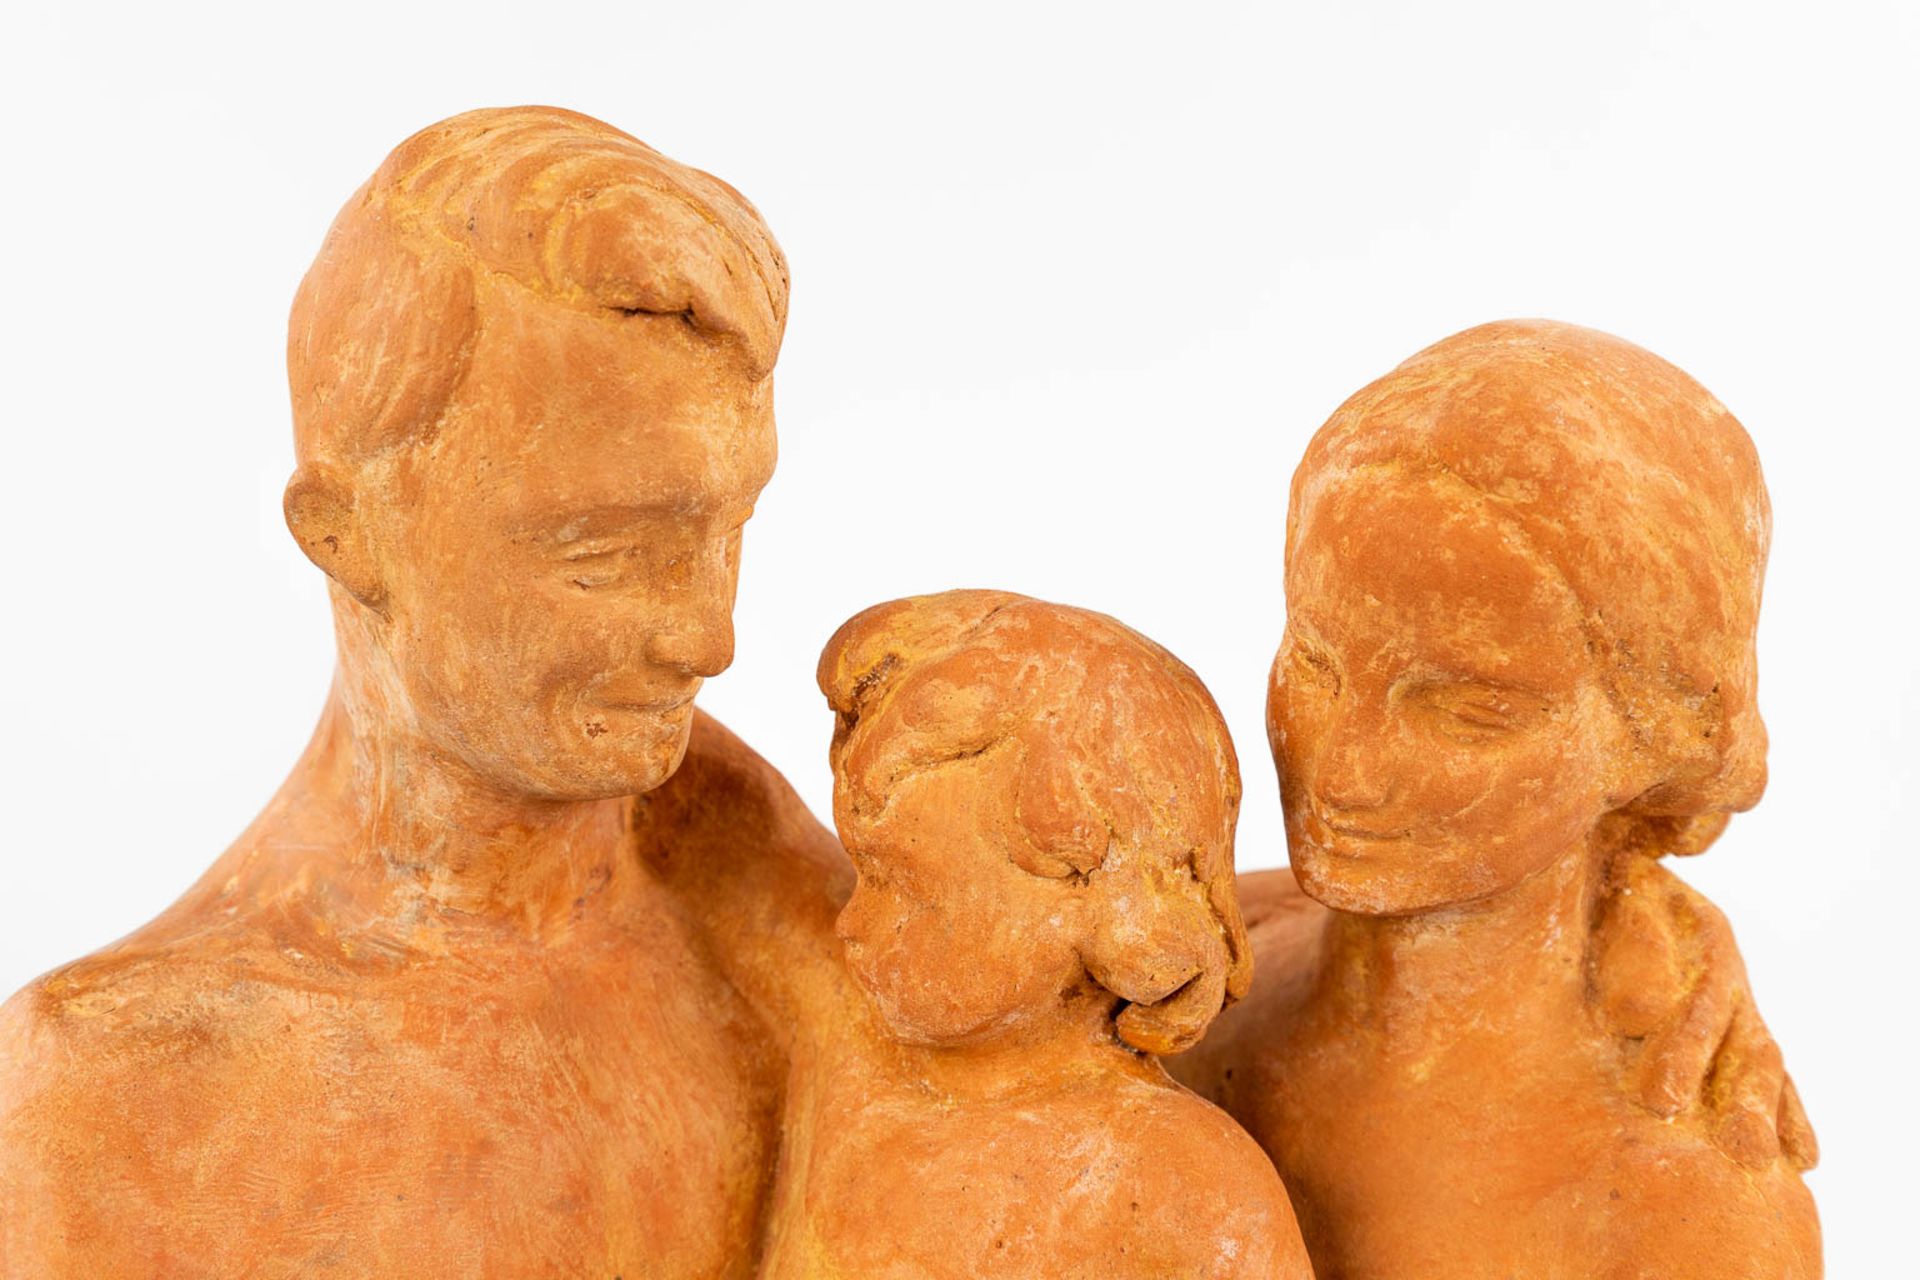 Achille LEYS (1873-1953) 'Family' a statue made of terracotta.Ê1946. (16 x 34 x 44cm) - Image 11 of 11